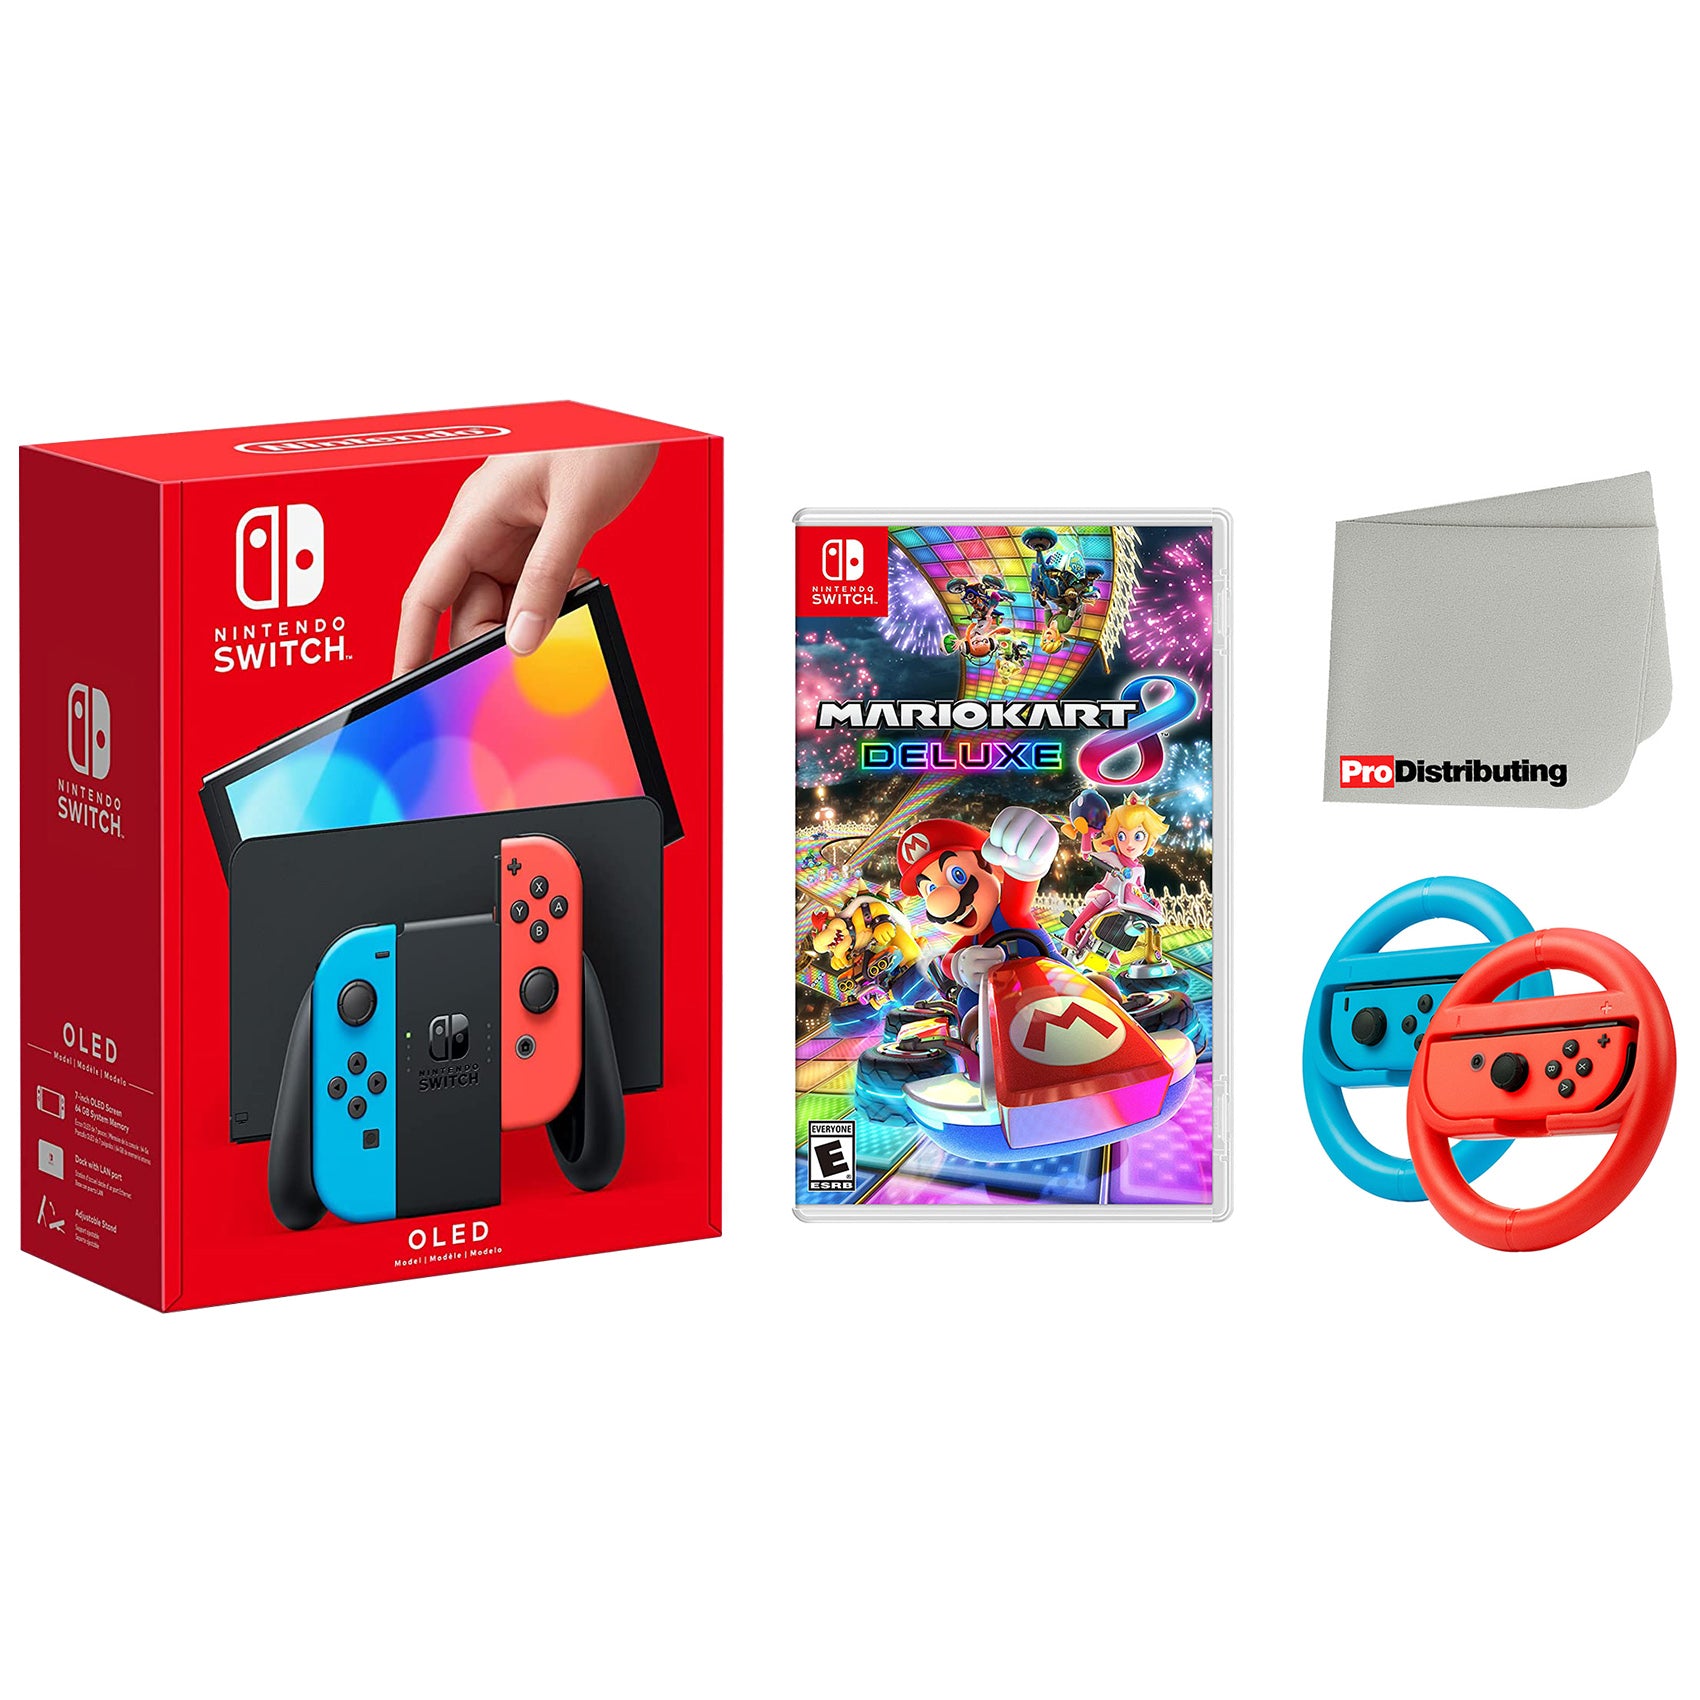 Nintendo Switch OLED Neon Console with Mario Kart 8, Steering Wheel Set and Screen Cleaning Cloth Bundle - Pro-Distributing